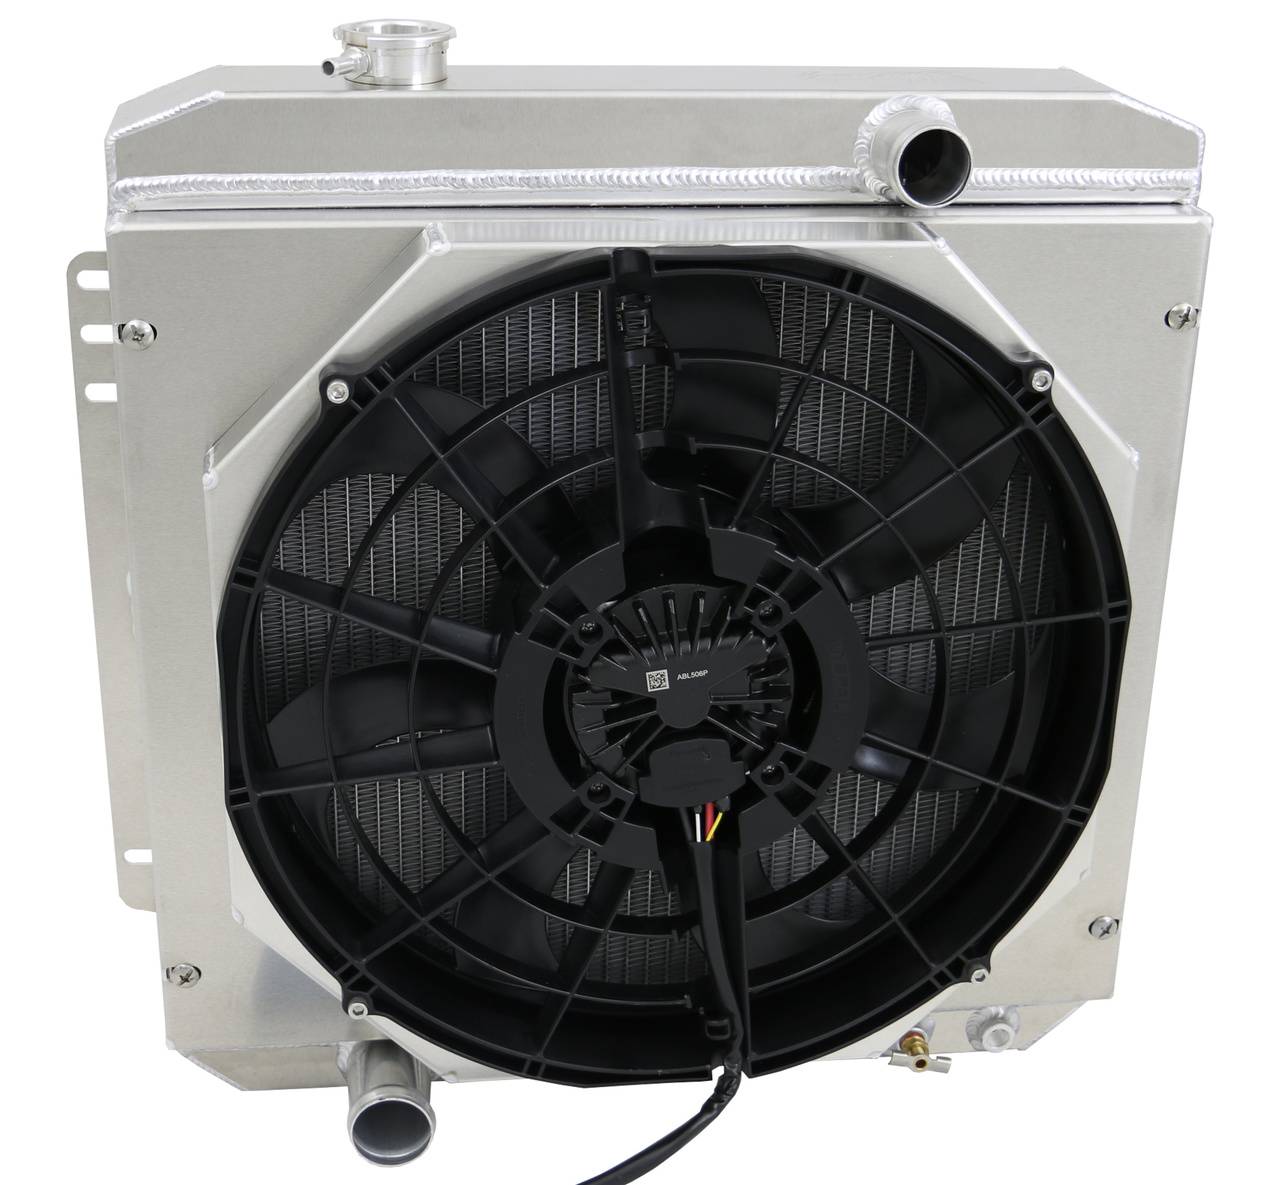 Wizard Cooling Inc - Wizard Cooling - 1962-1968 Ford Fairlane & 1966-70 Falcon Aluminum Radiator W/ Brushless Fan Shroud - 260-108BL